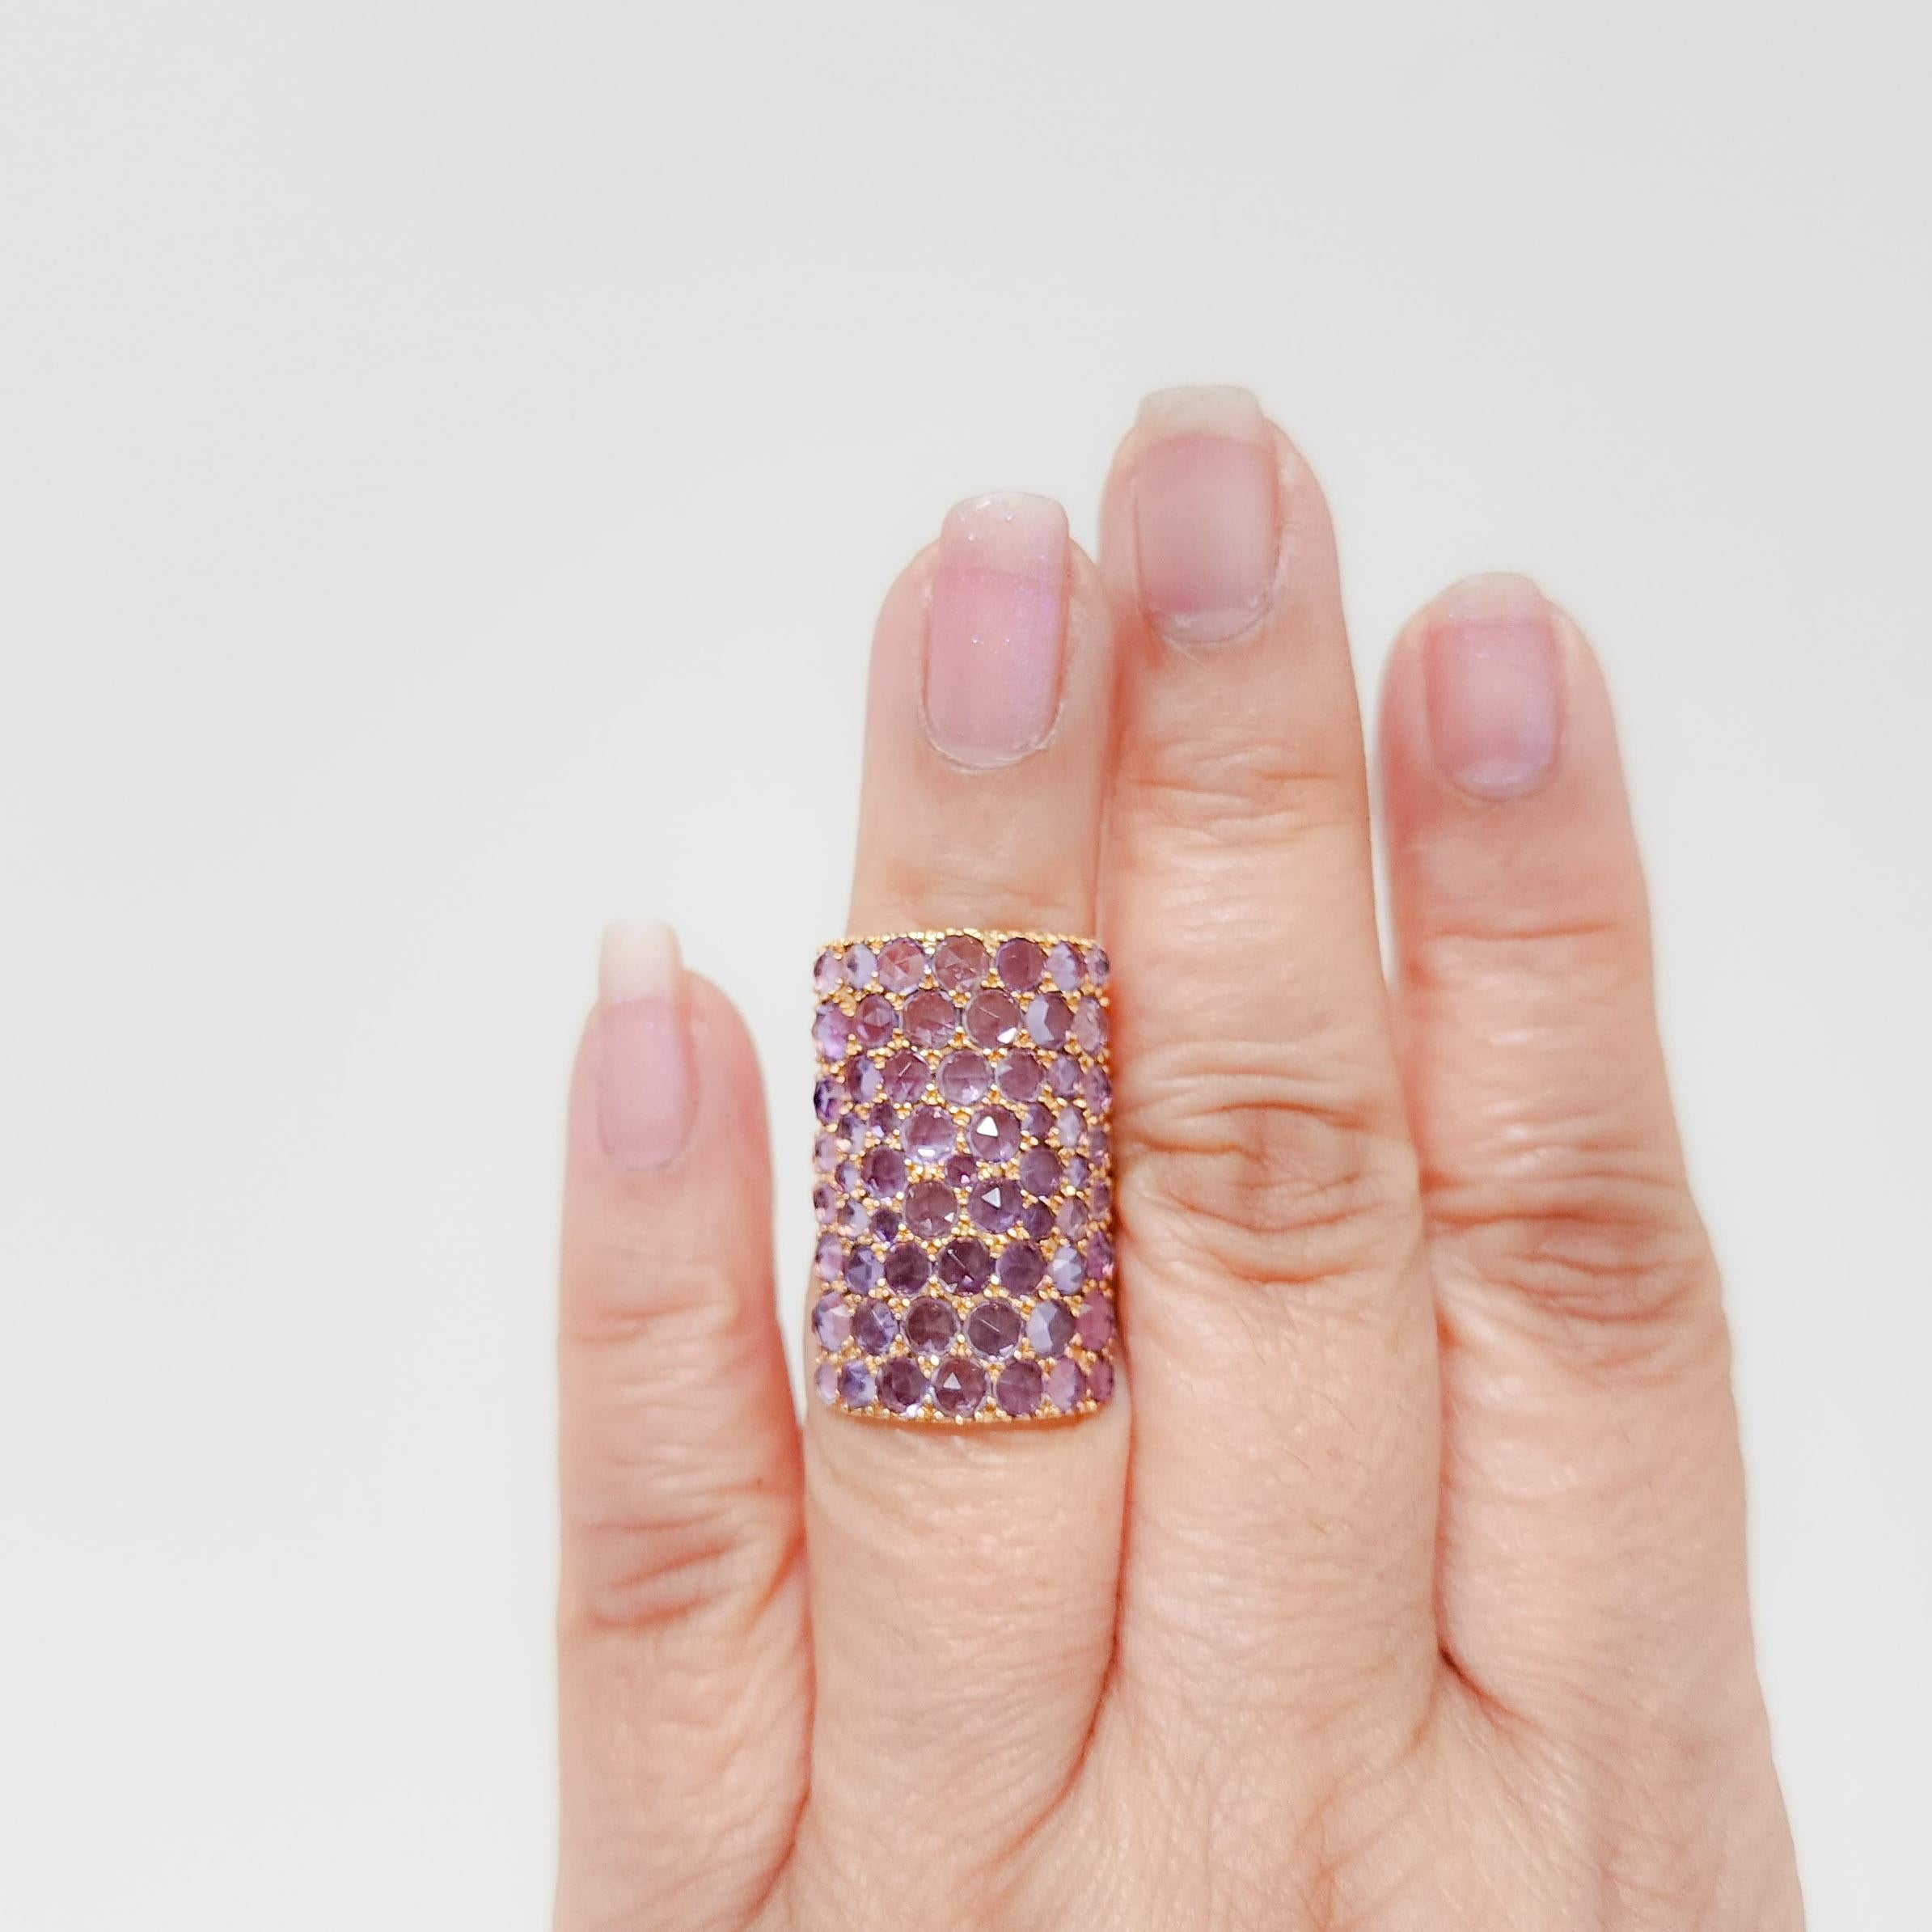 Beautiful ring featuring 3.50 cts of unique pinkish purple amethyst rounds in a handmade 18k rose gold mounting.  This design elongates the fingers.  There is a designer stamp, but it is unknown.  Looks like an 